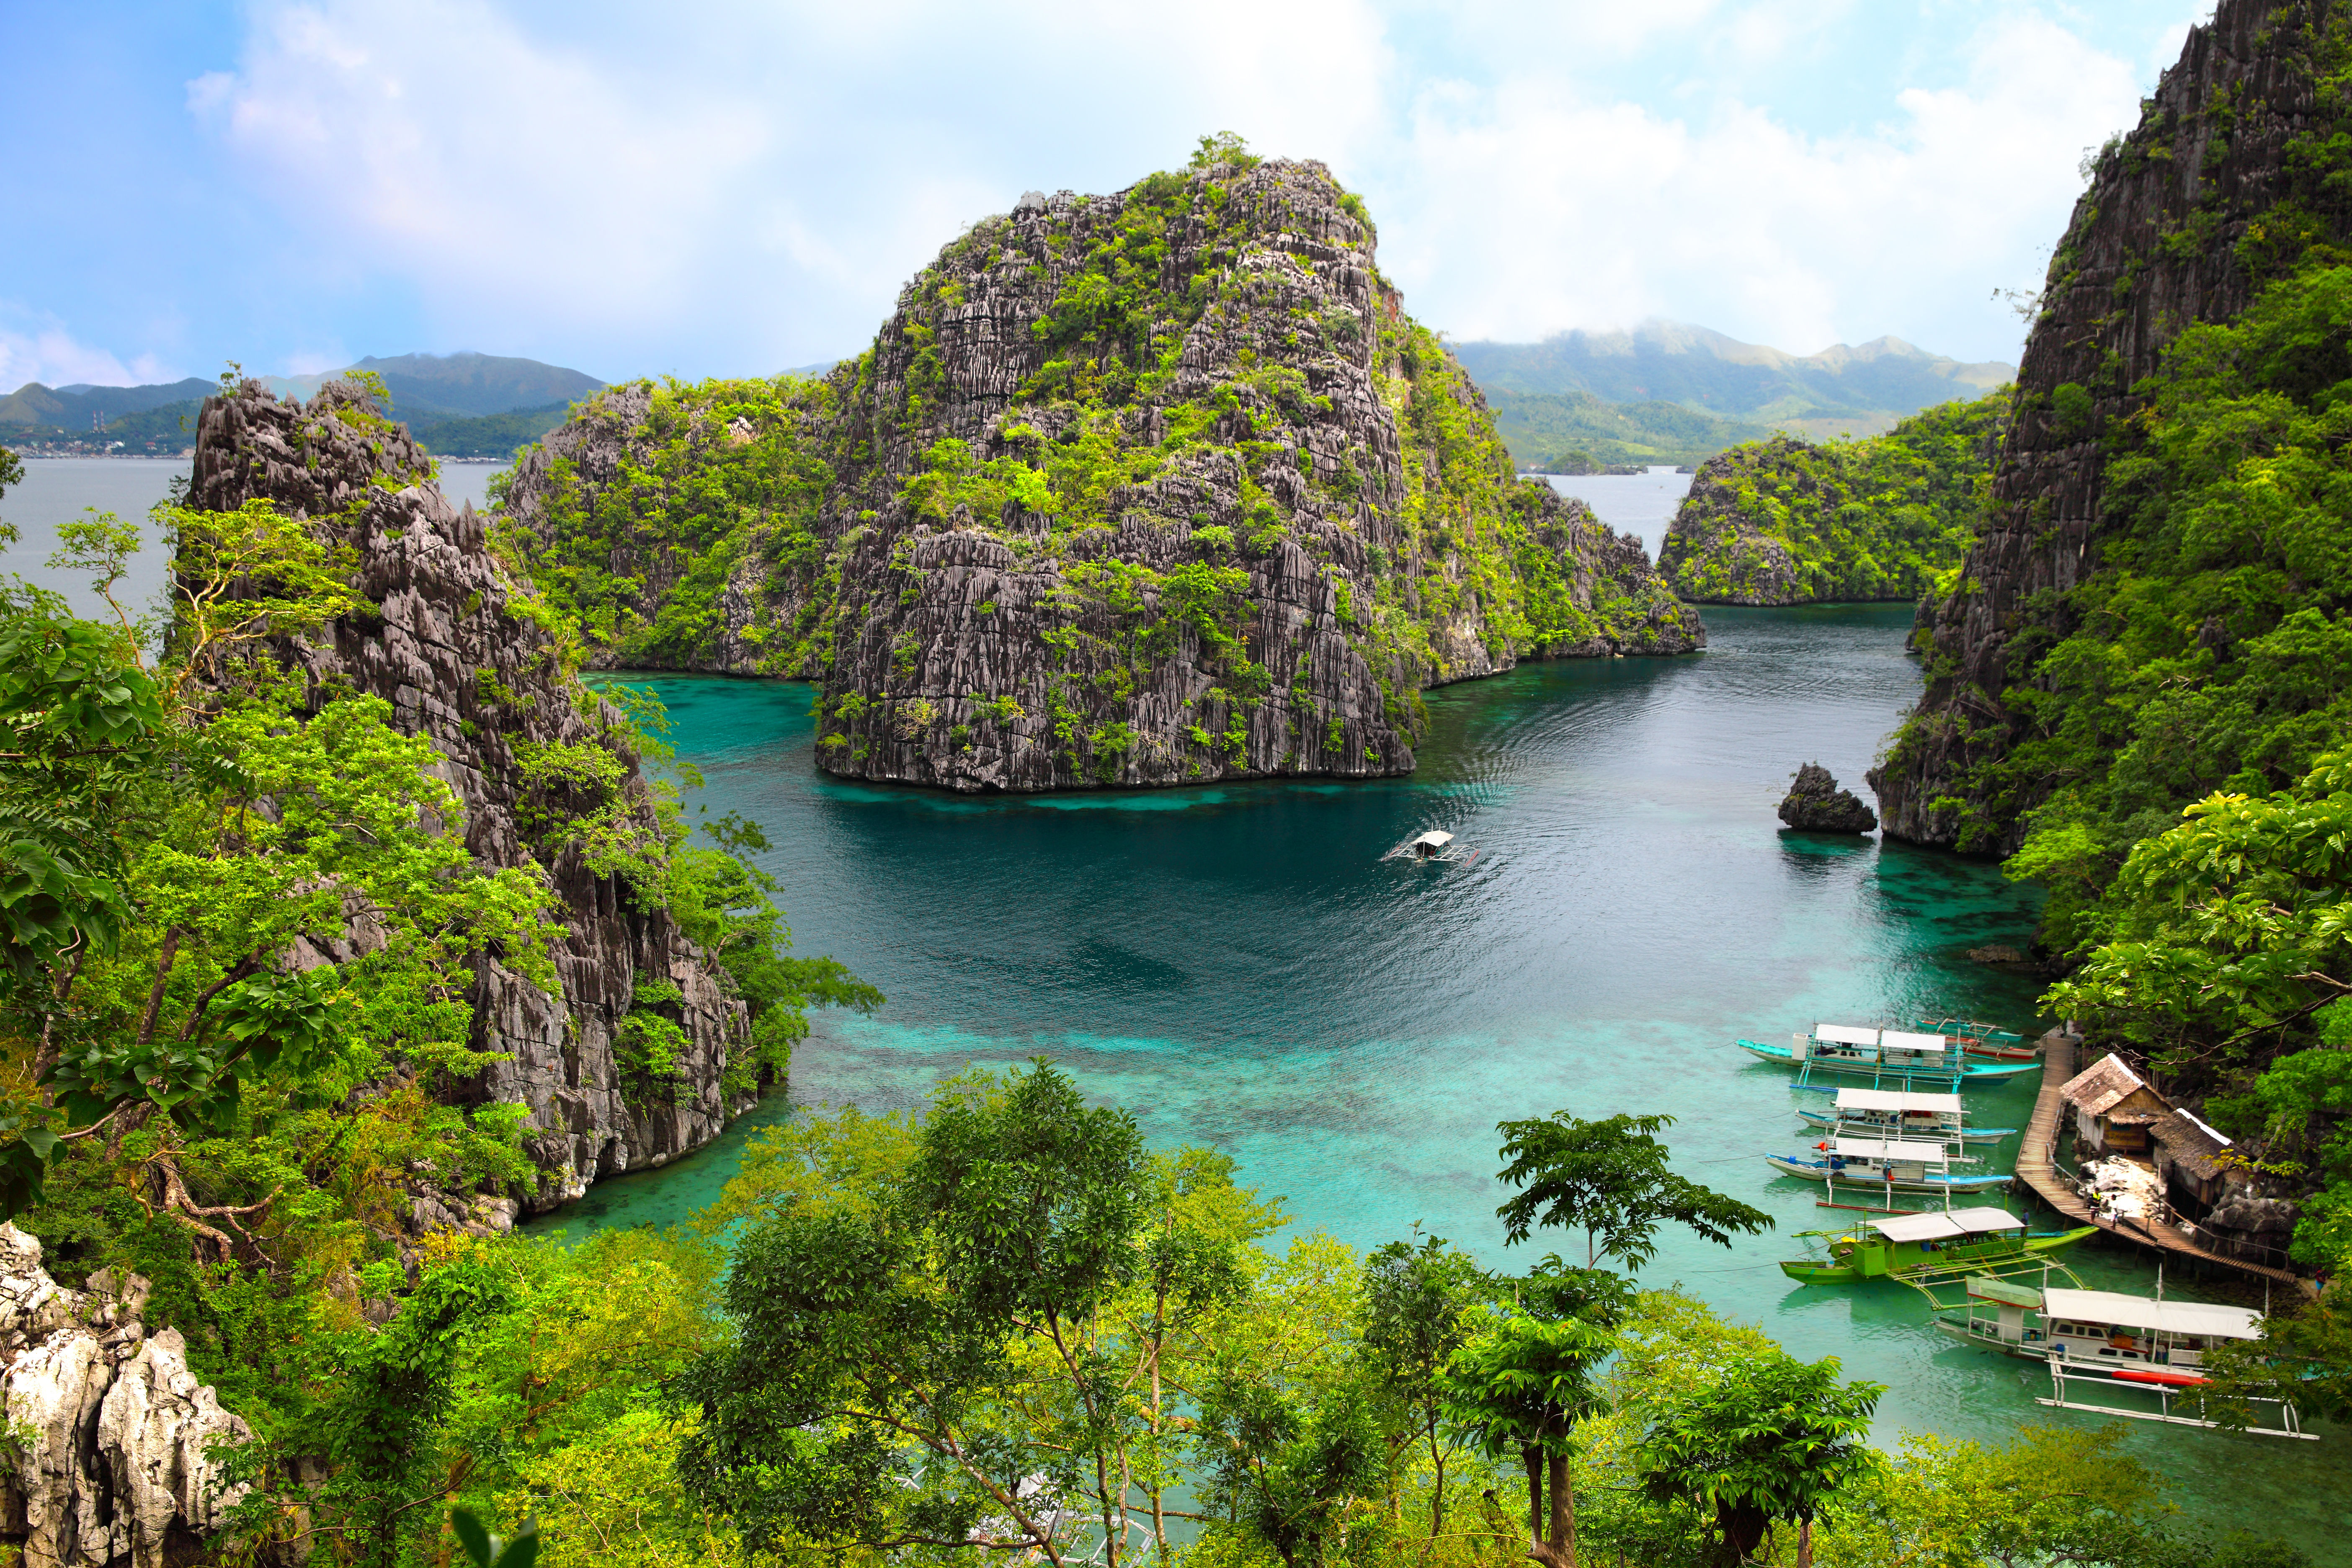 Landscape of view of Busuanga island with green rocky outcrops, blue waters and moored boats. 